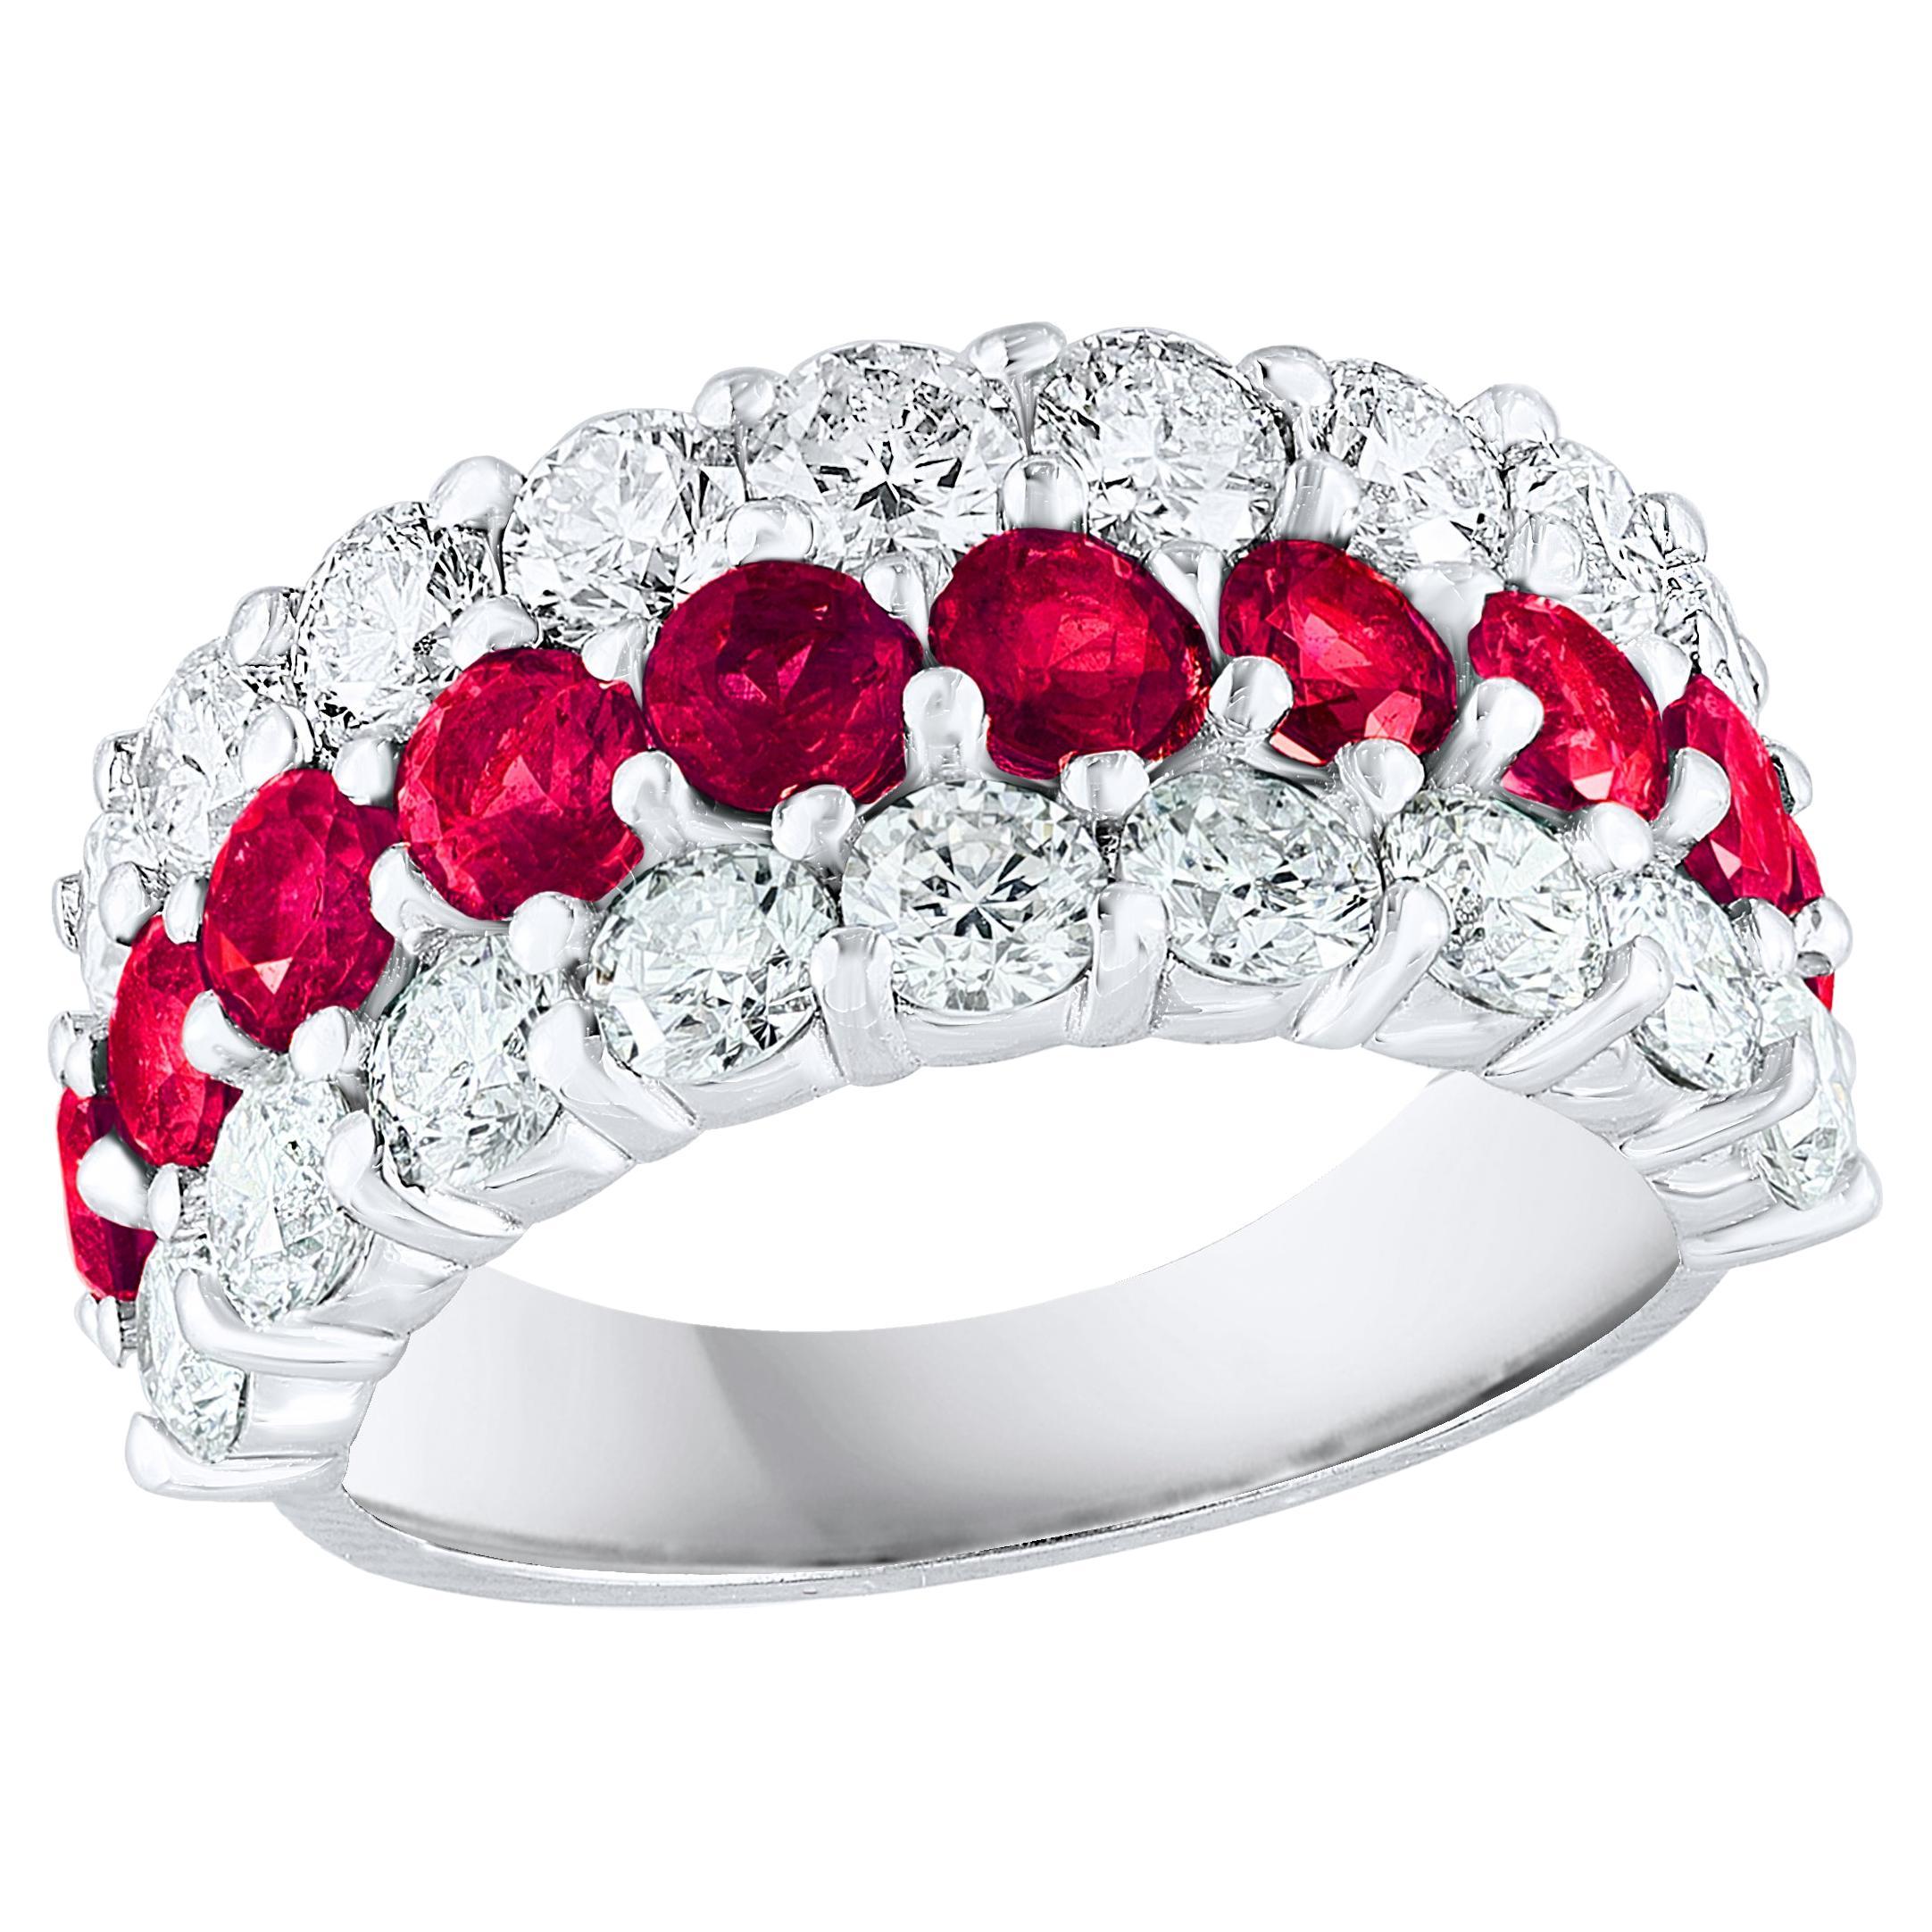 1.80 Ct Round Shape Ruby and Diamond Three Row Band Ring in 14K White Gold (Bague à trois rangs en or blanc 14K)